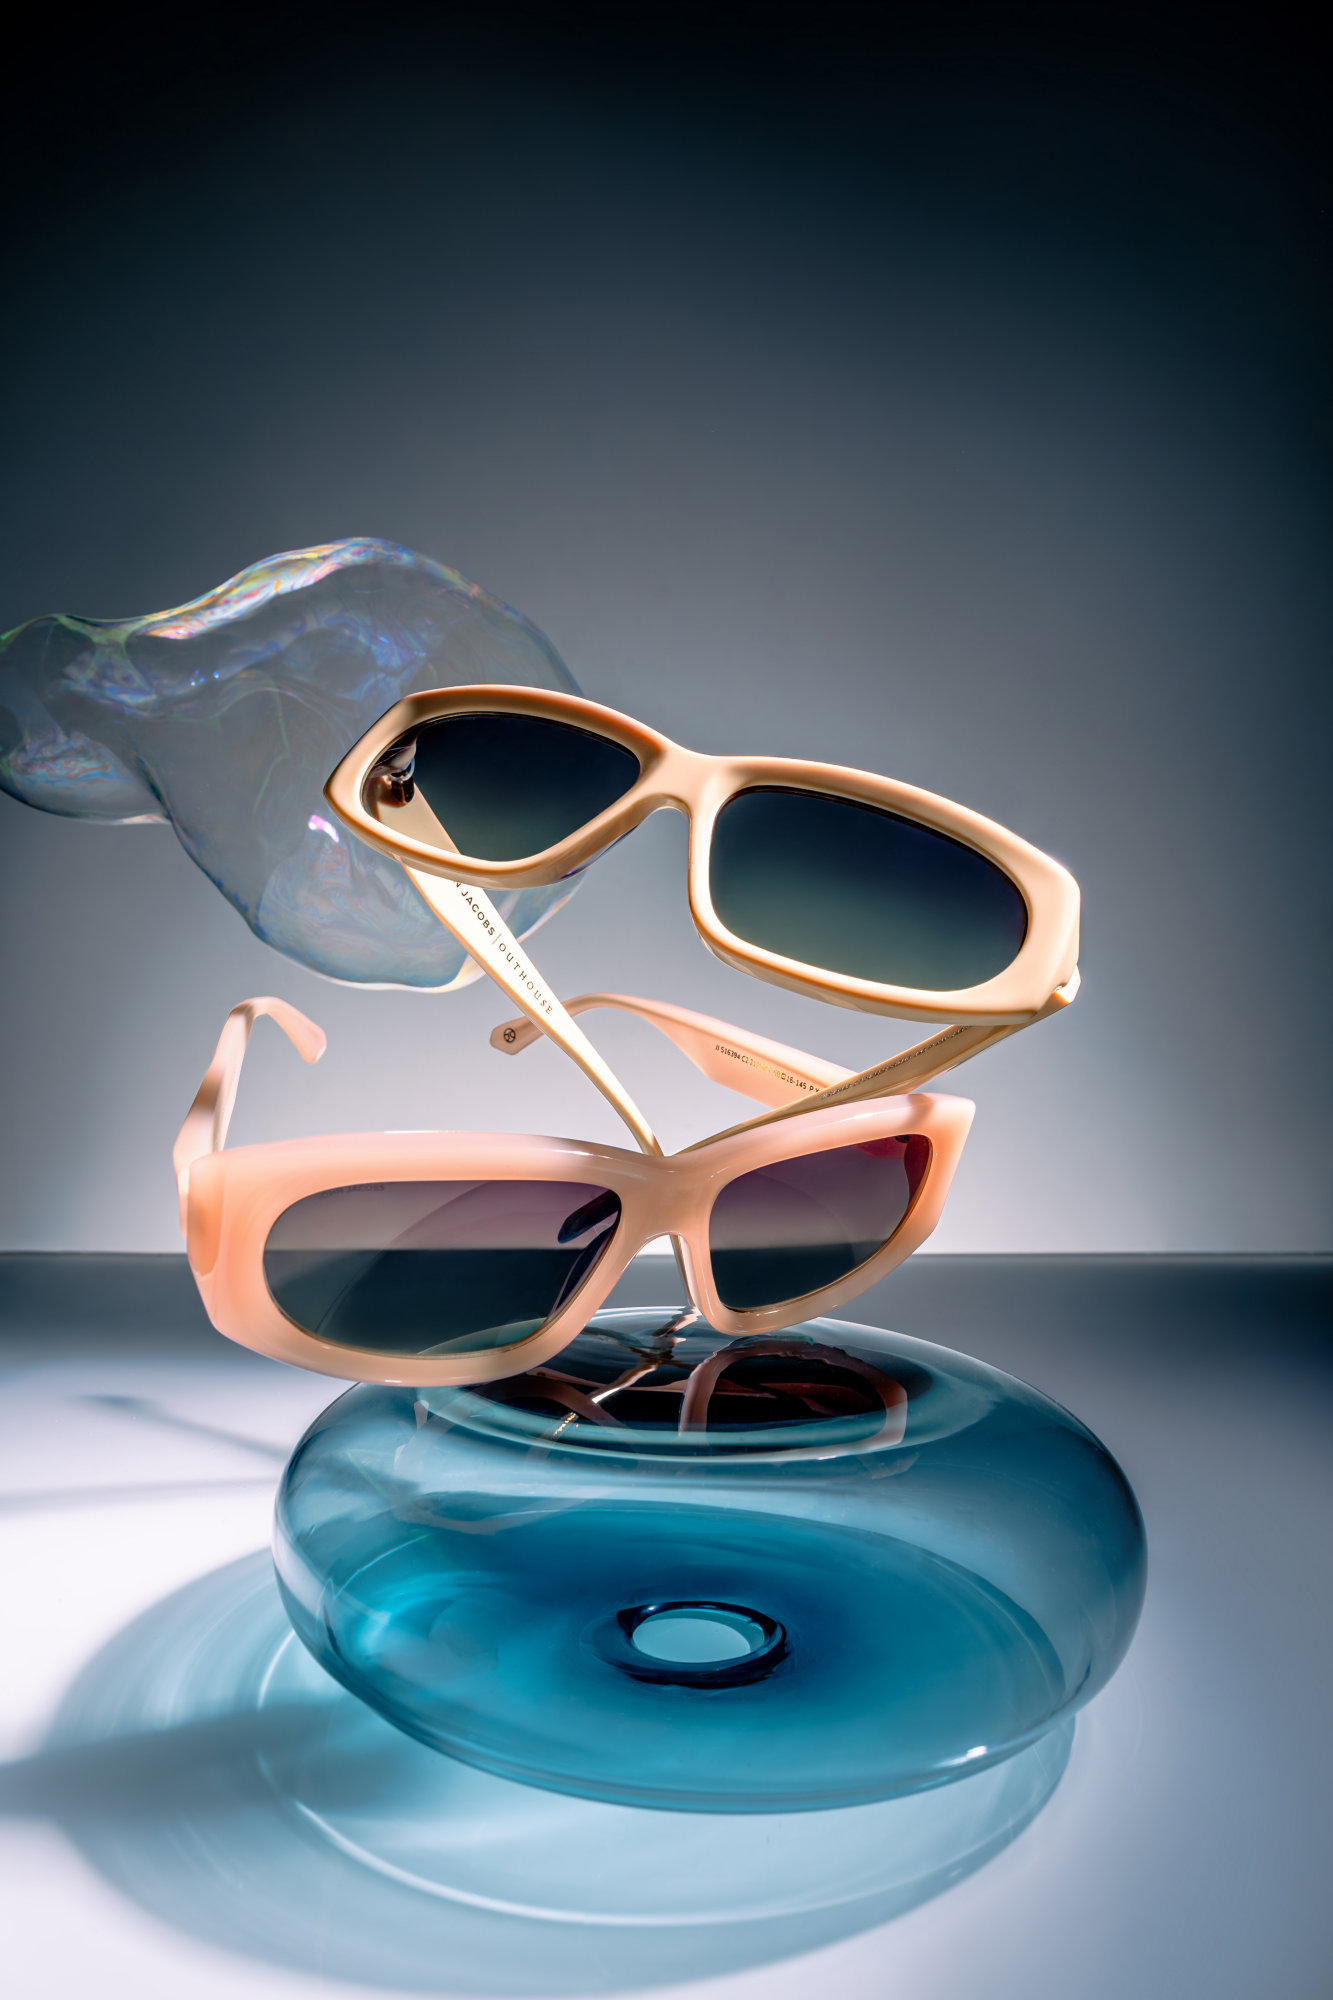 Outhouse Jewellery and John Jacobs come together to unveil a Futuristic Eyewear Collaboration